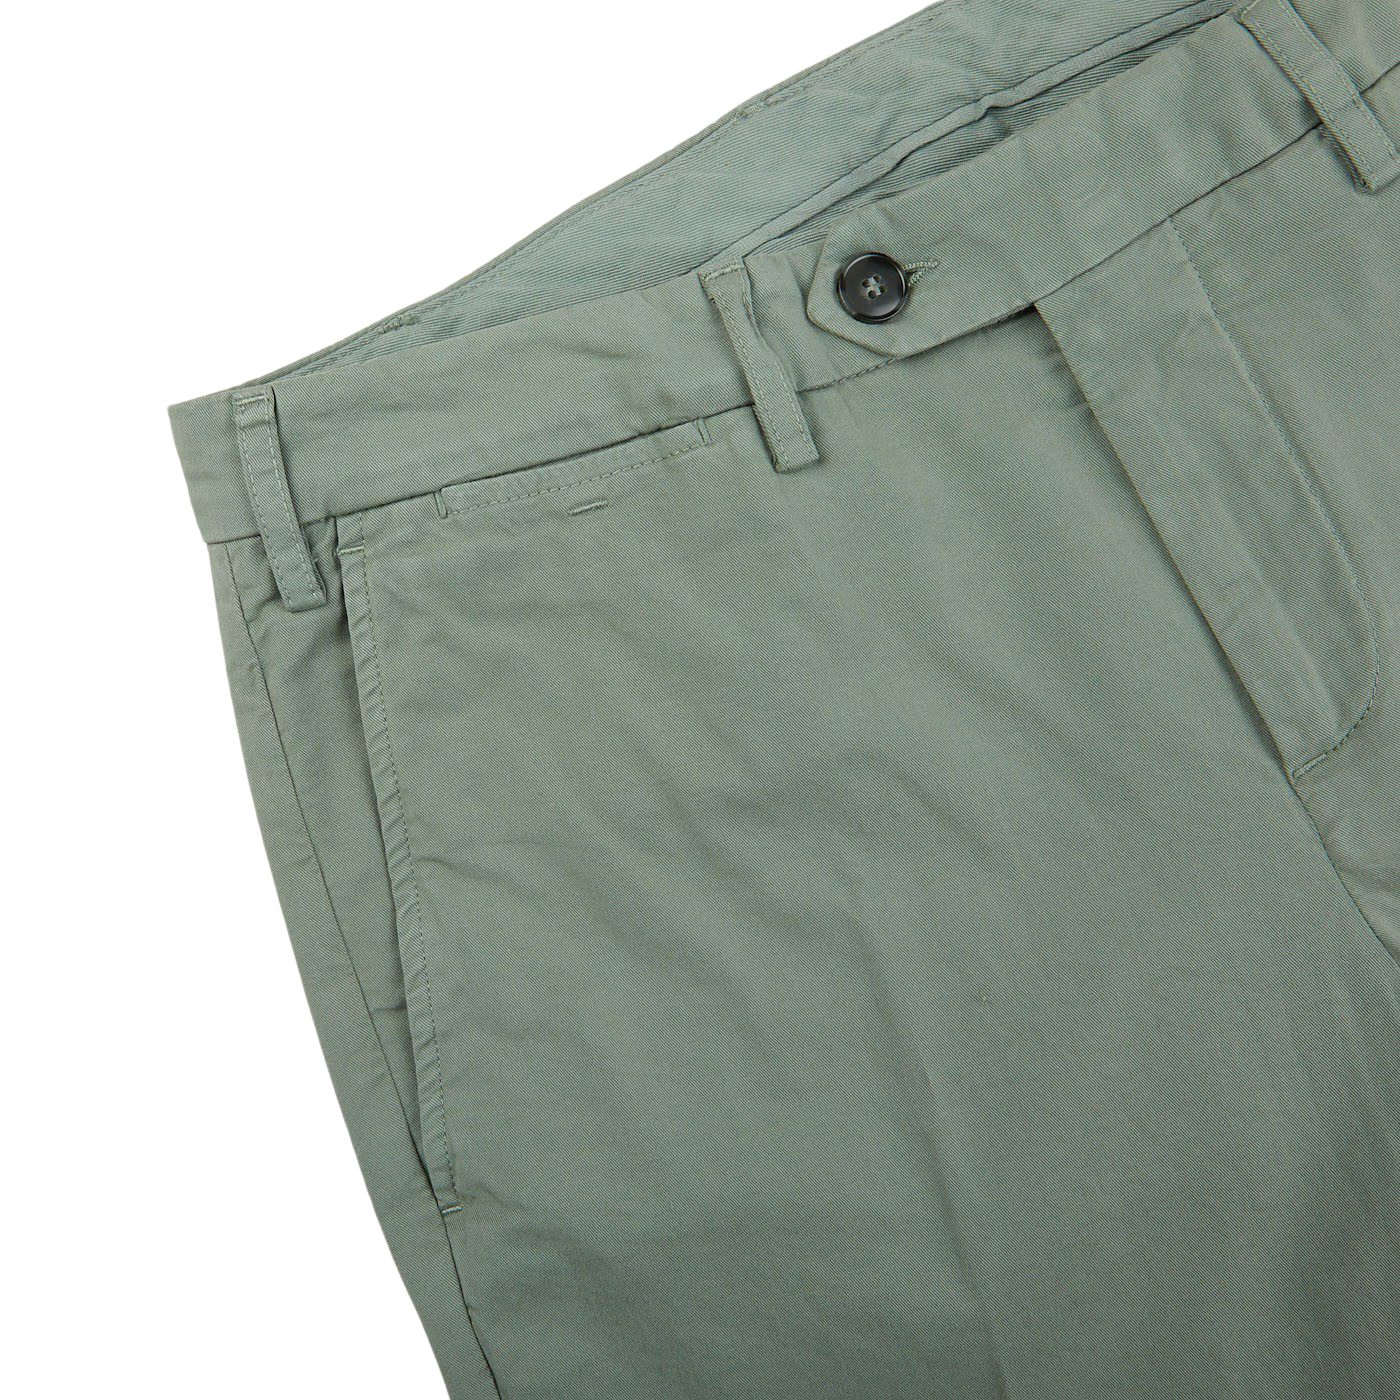 A close up of Canali men's Sage Green Cotton Stretch Flat Front Chinos.